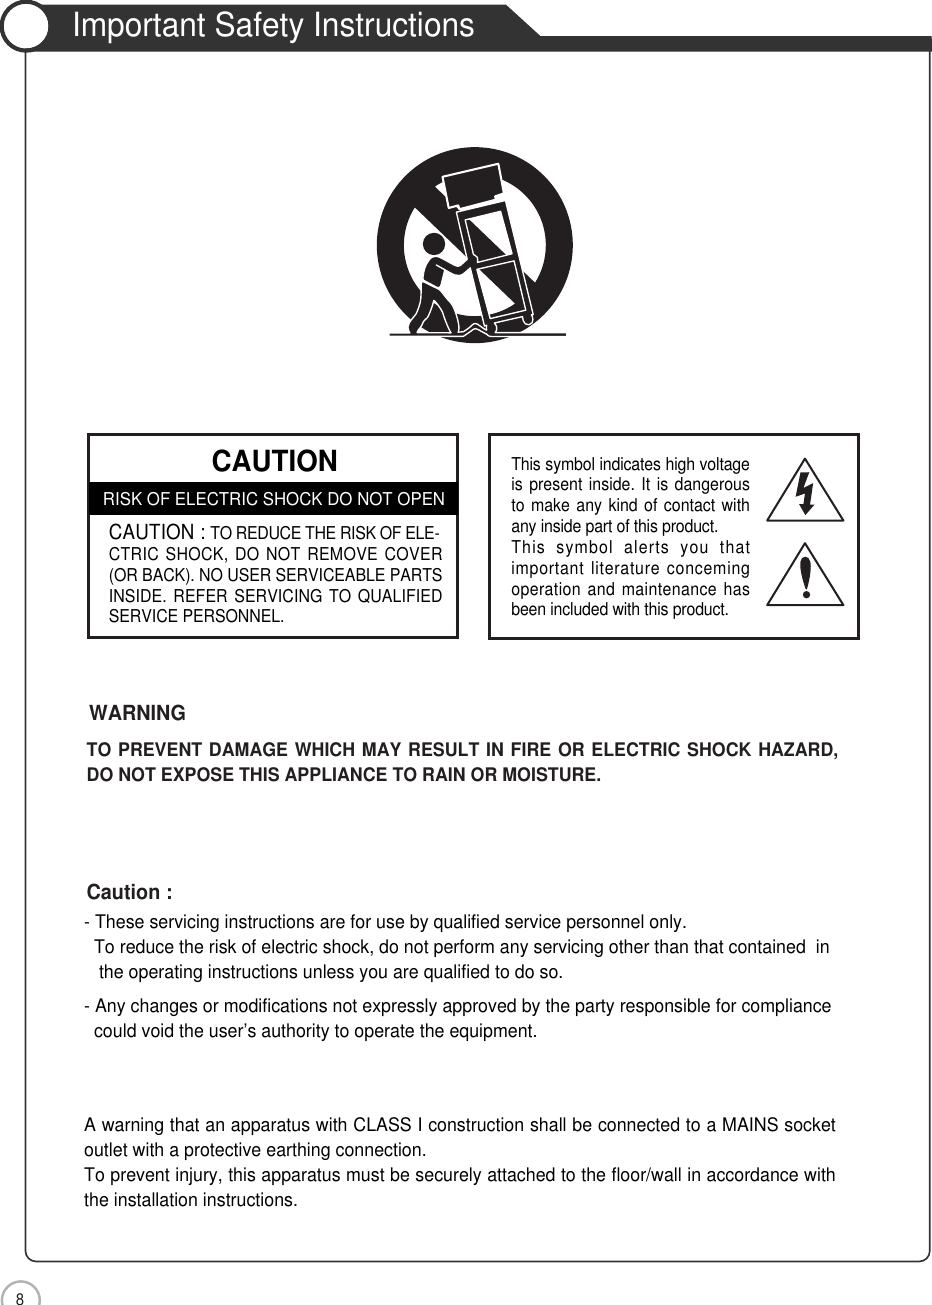 Safety Precautions8Important Safety Instructions- These servicing instructions are for use by qualified service personnel only.  To reduce the risk of electric shock, do not perform any servicing other than that contained  in the operating instructions unless you are qualified to do so.- Any changes or modifications not expressly approved by the party responsible for compliance could void the user’s authority to operate the equipment.A warning that an apparatus with CLASS I construction shall be connected to a MAINS socketoutlet with a protective earthing connection.To prevent injury, this apparatus must be securely attached to the floor/wall in accordance withthe installation instructions.Caution :TO PREVENT DAMAGE WHICH MAY RESULT IN FIRE OR ELECTRIC SHOCK HAZARD,DO NOT EXPOSE THIS APPLIANCE TO RAIN OR MOISTURE.WARNING CAUTIONRISK OF ELECTRIC SHOCK DO NOT OPENCAUTION : TO REDUCE THE RISK OF ELE-CTRIC SHOCK, DO NOT REMOVE COVER(OR BACK). NO USER SERVICEABLE PARTSINSIDE. REFER SERVICING TO QUALIFIEDSERVICE PERSONNEL.This symbol indicates high voltageis present inside. It is dangerousto make any kind of contact withany inside part of this product.This symbol alerts you thatimportant literature concemingoperation and maintenance hasbeen included with this product.